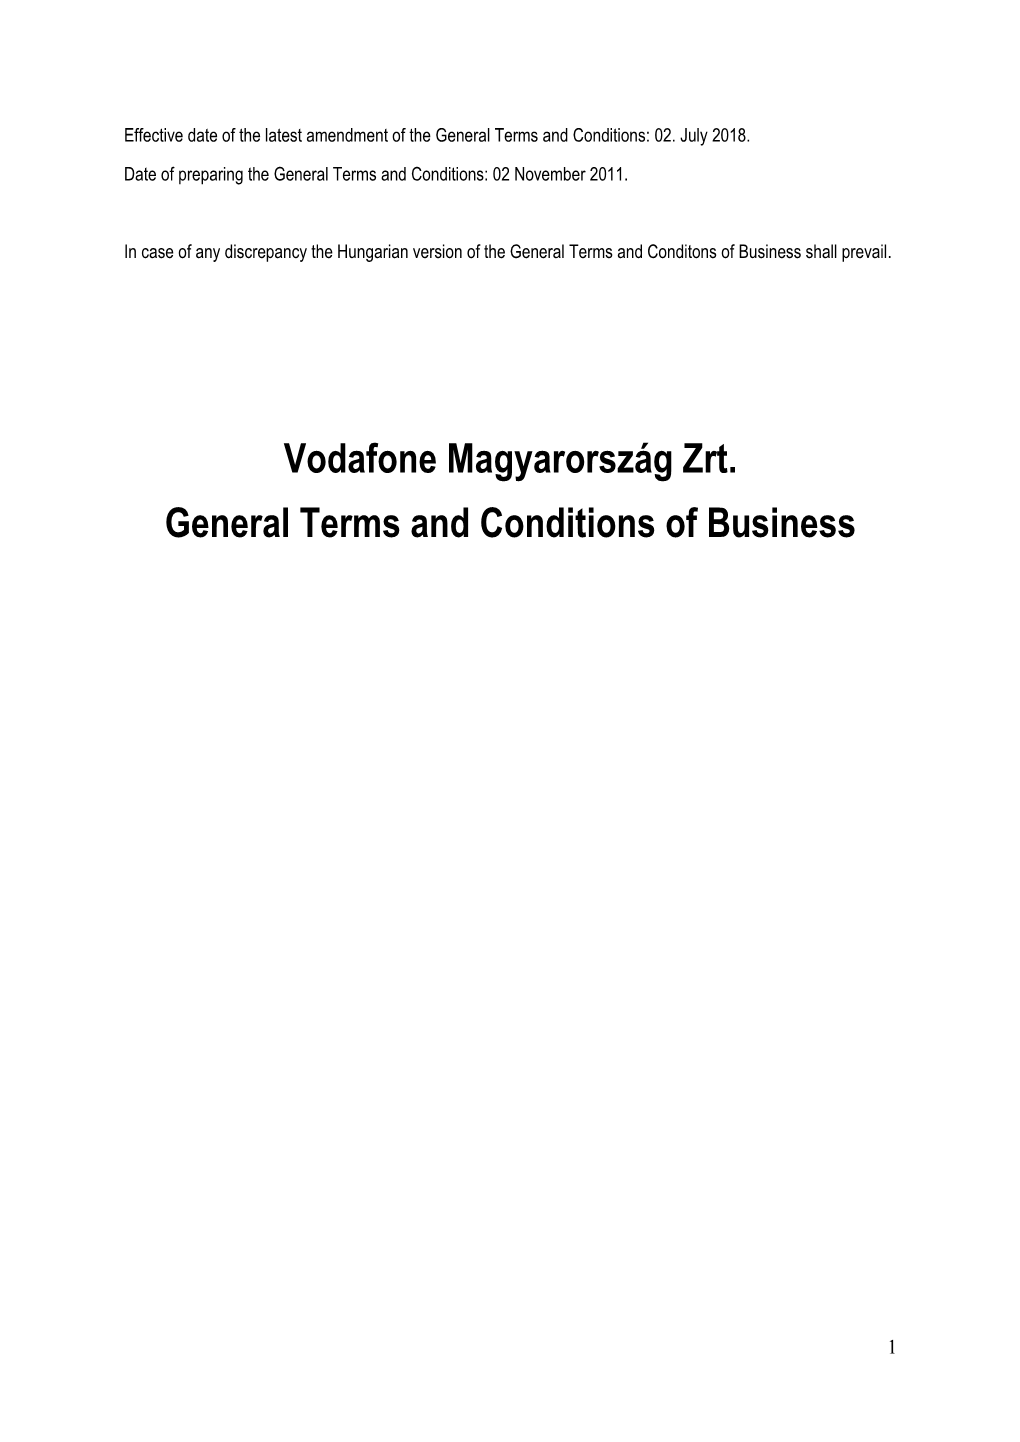 Vodafone Magyarország Zrt. General Terms and Conditions of Business